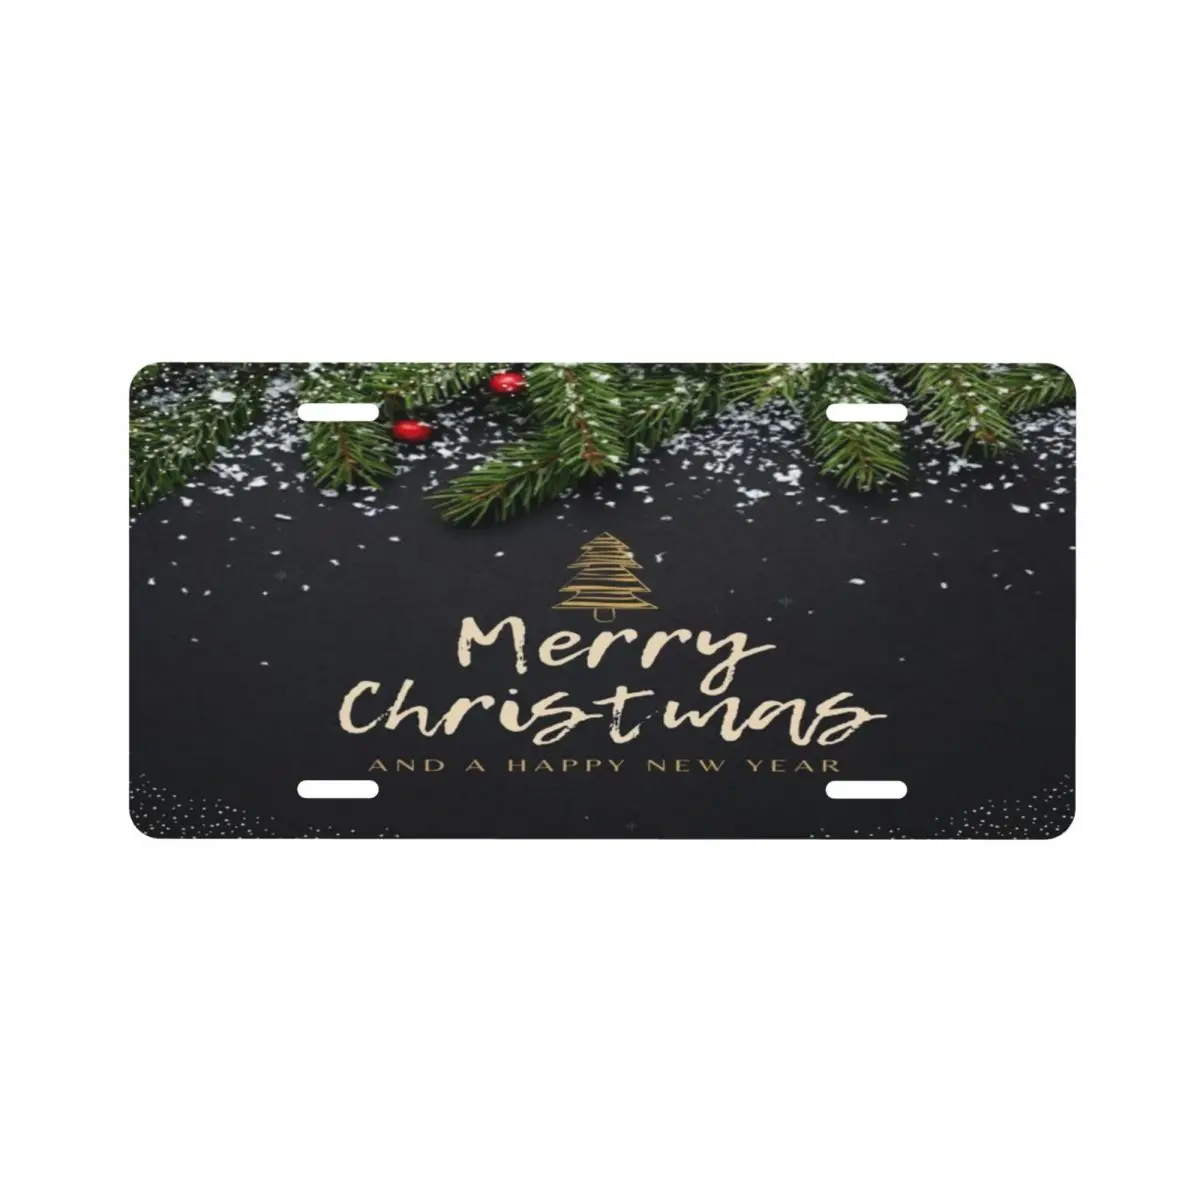 

Merry Christmas Decorated 6inX12in car license plate decoration